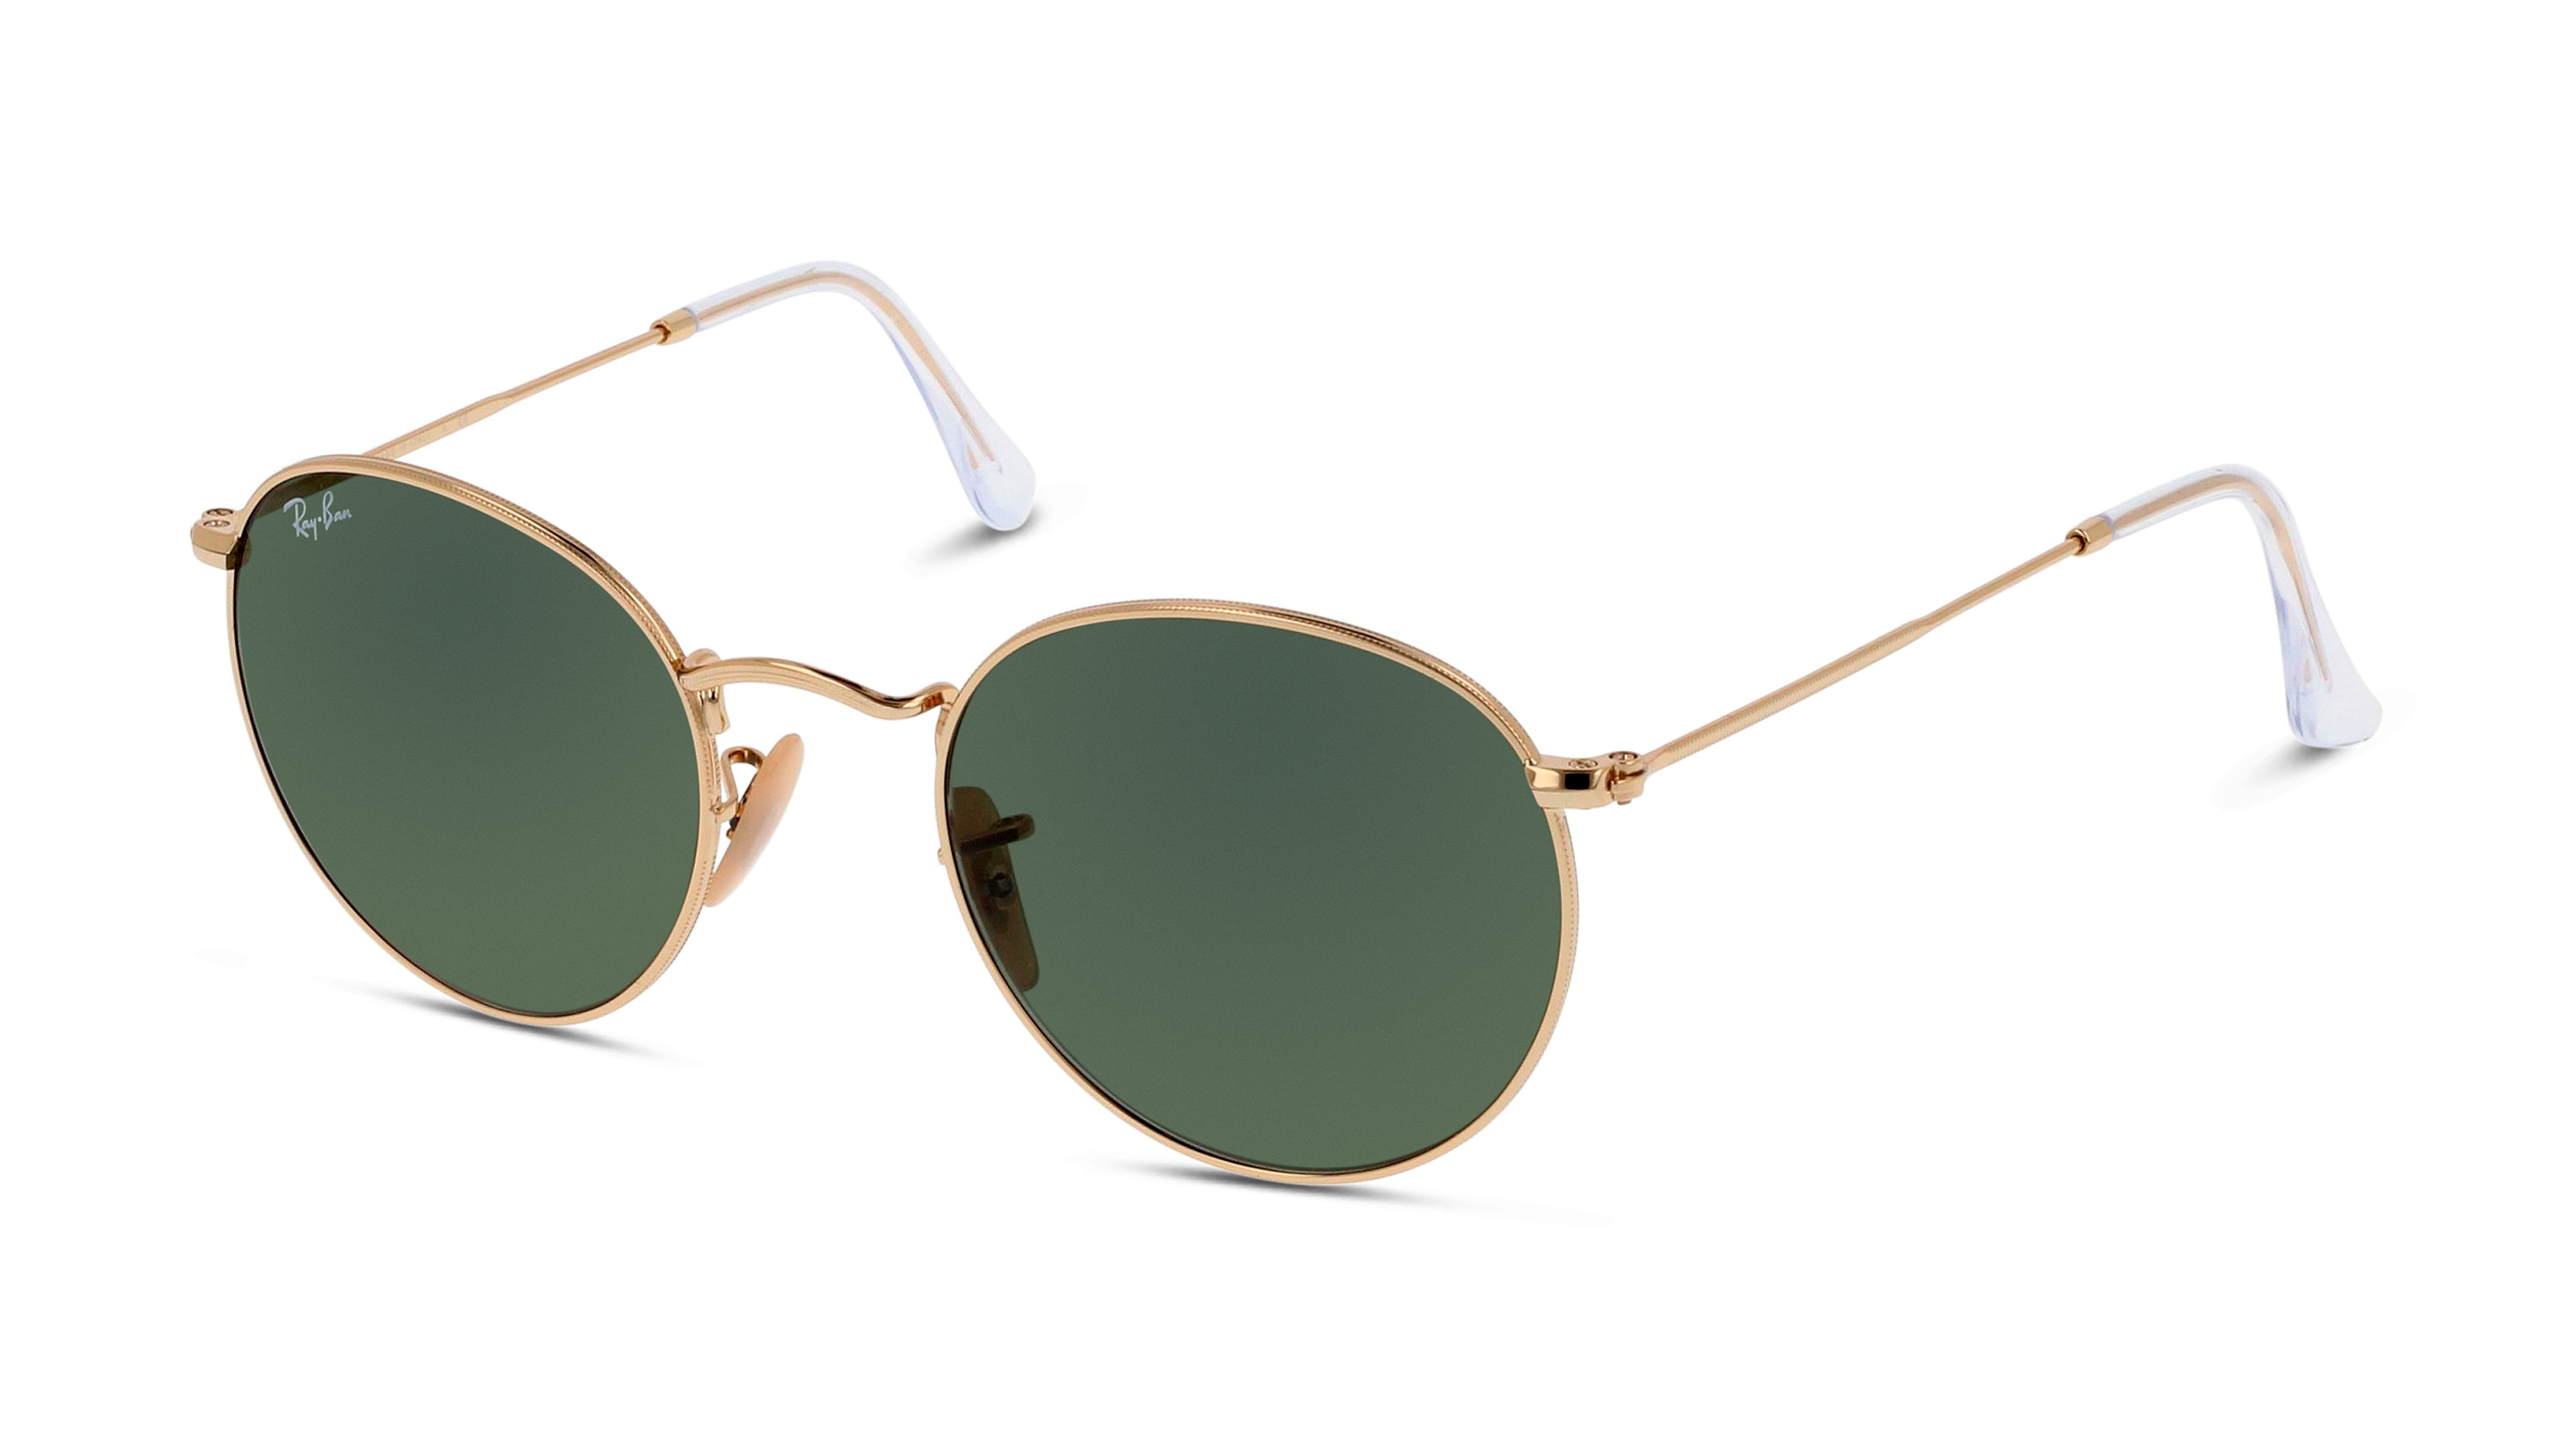 [products.image.angle_left01] Ray-Ban ROUND METAL 0RB3447 001 Sonnenbrille